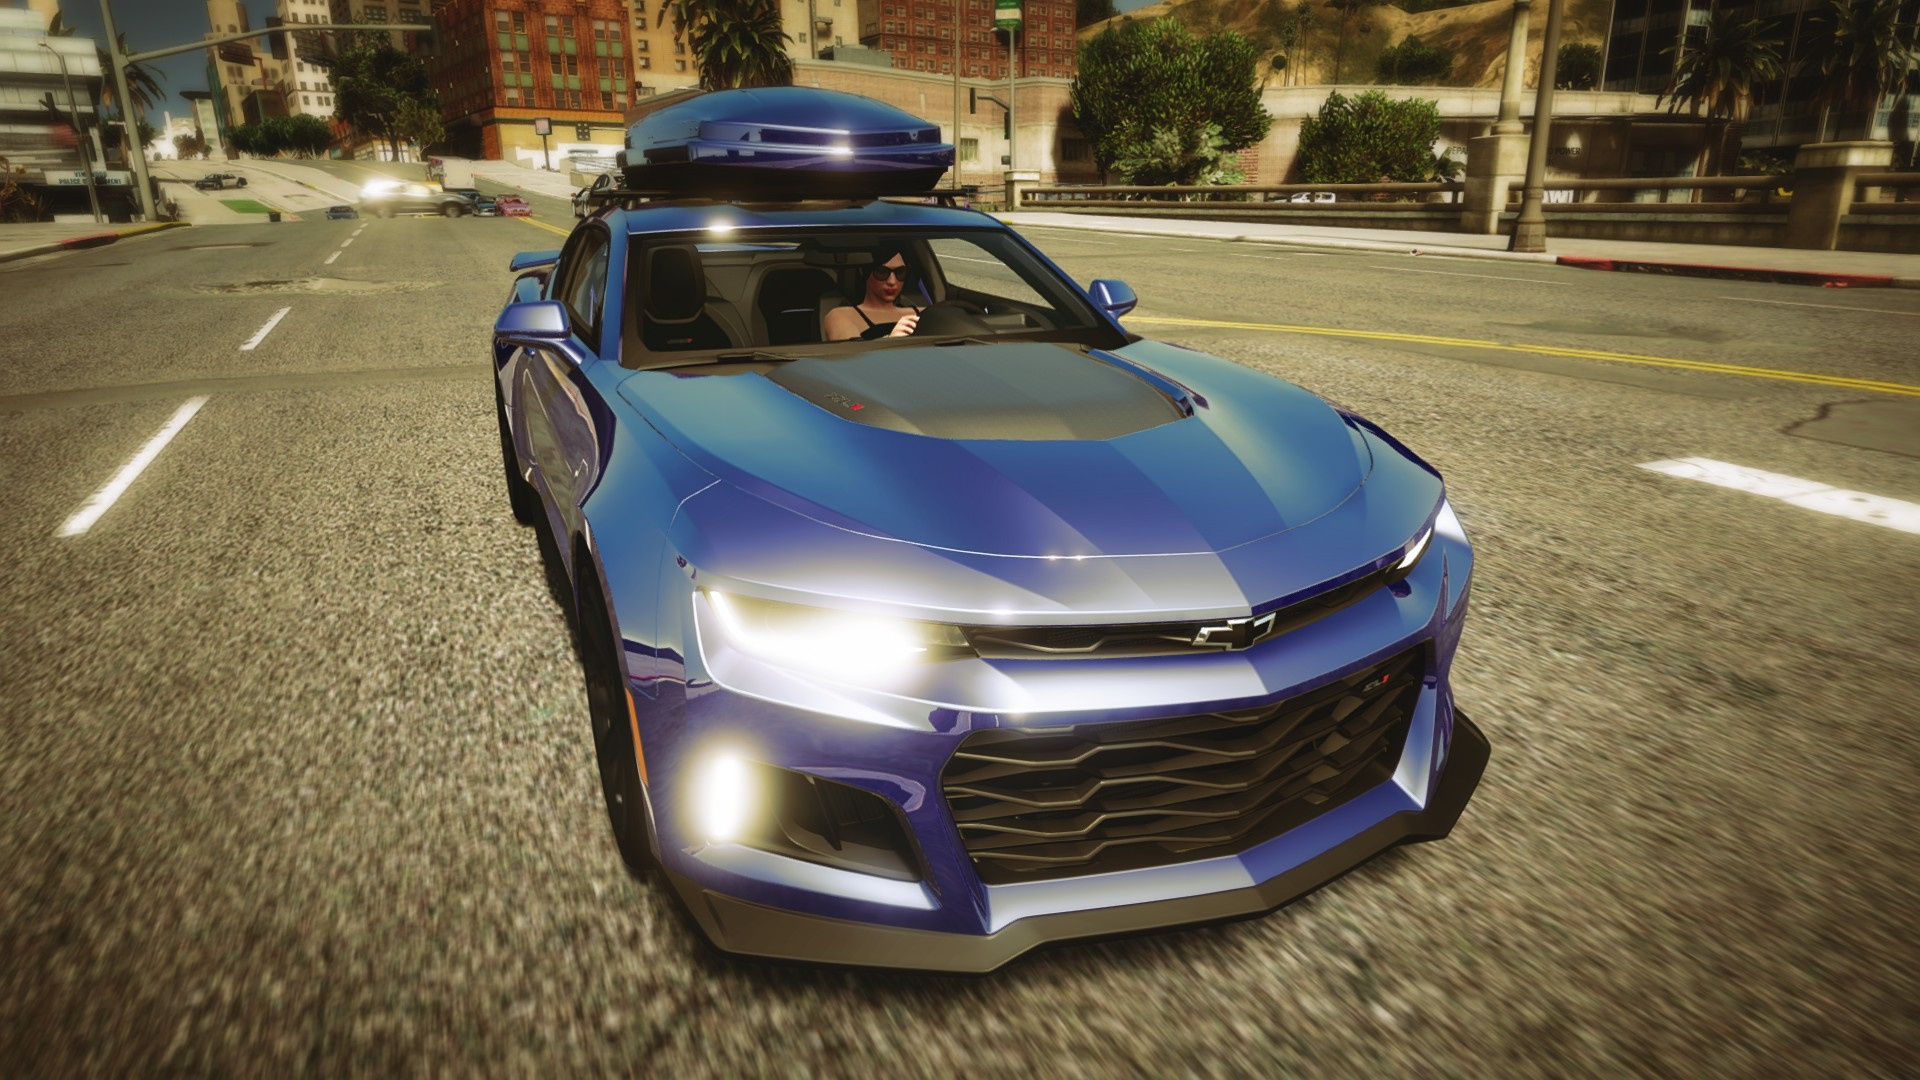 Is there camaro in gta 5 фото 3